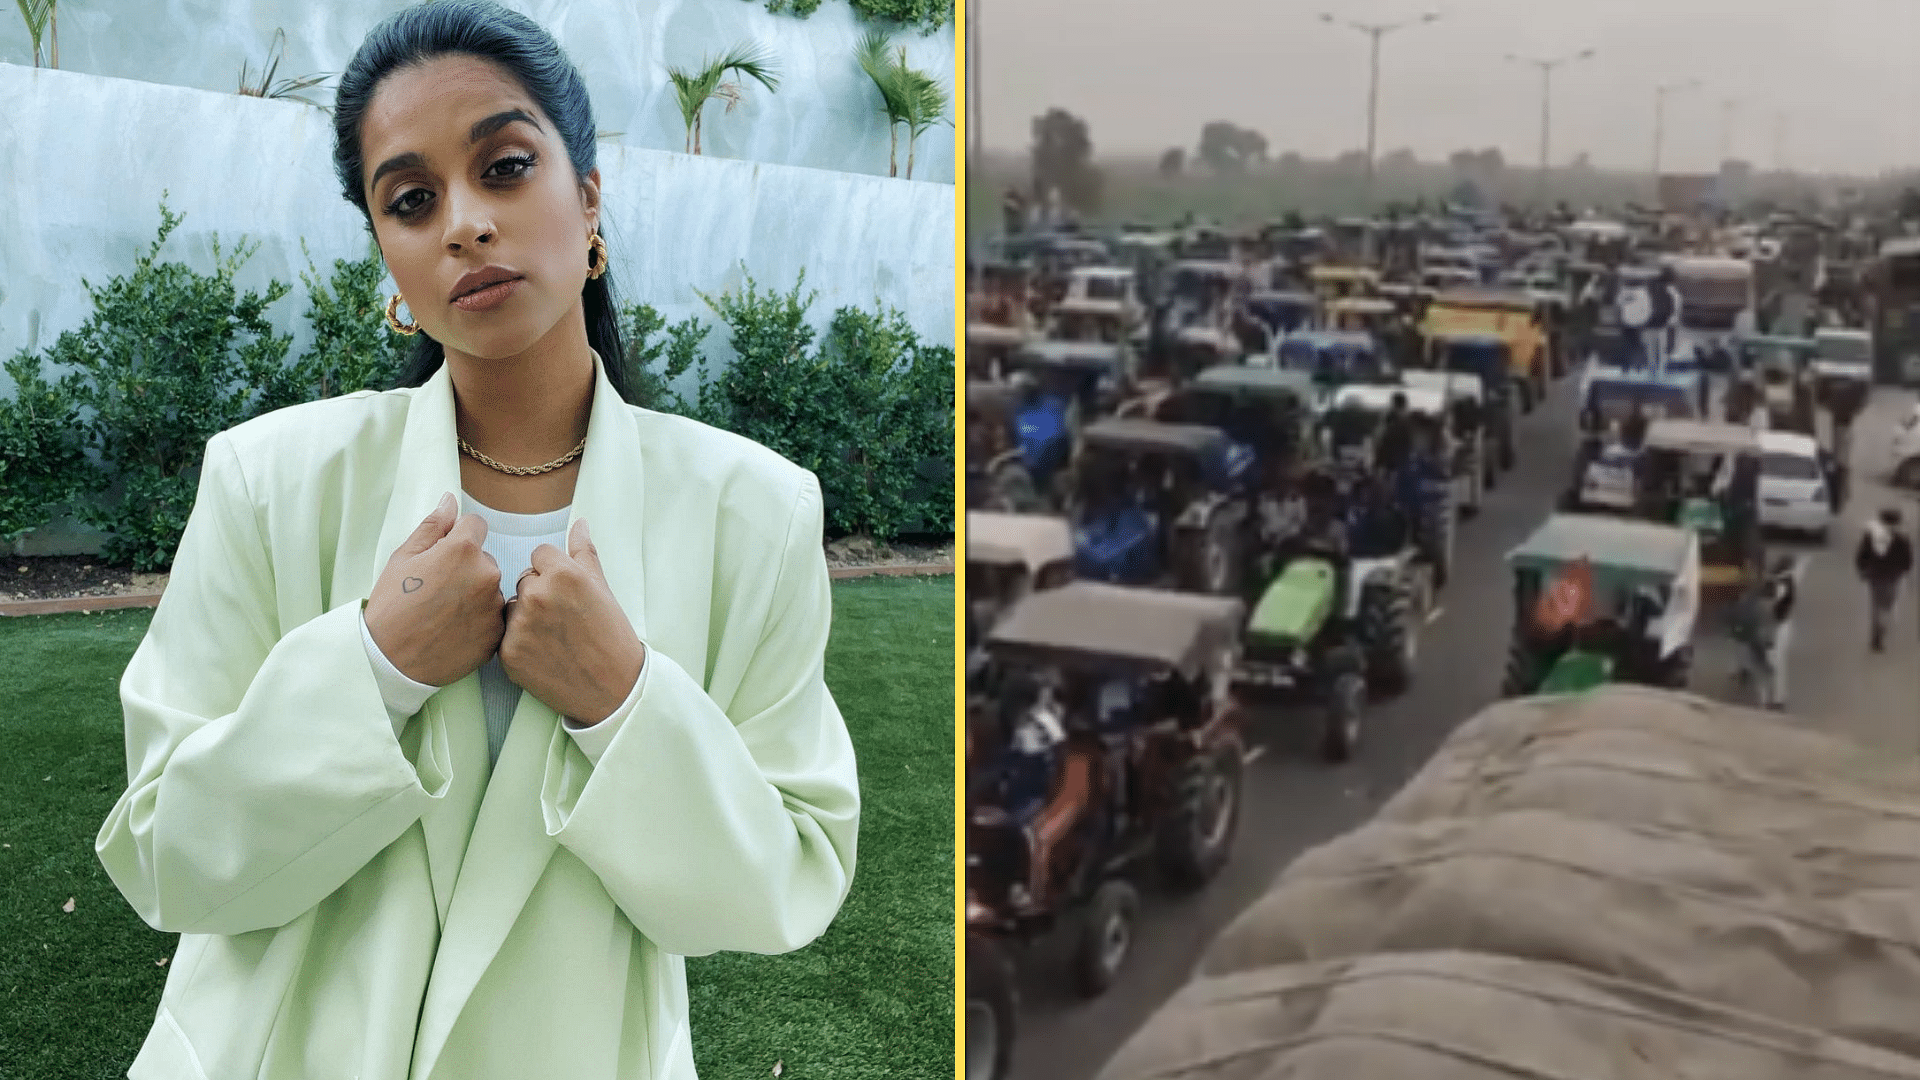 YouTube star Lilly Singh tweeted in support of protesting farmers who organised a tractor rally on Republic Day.